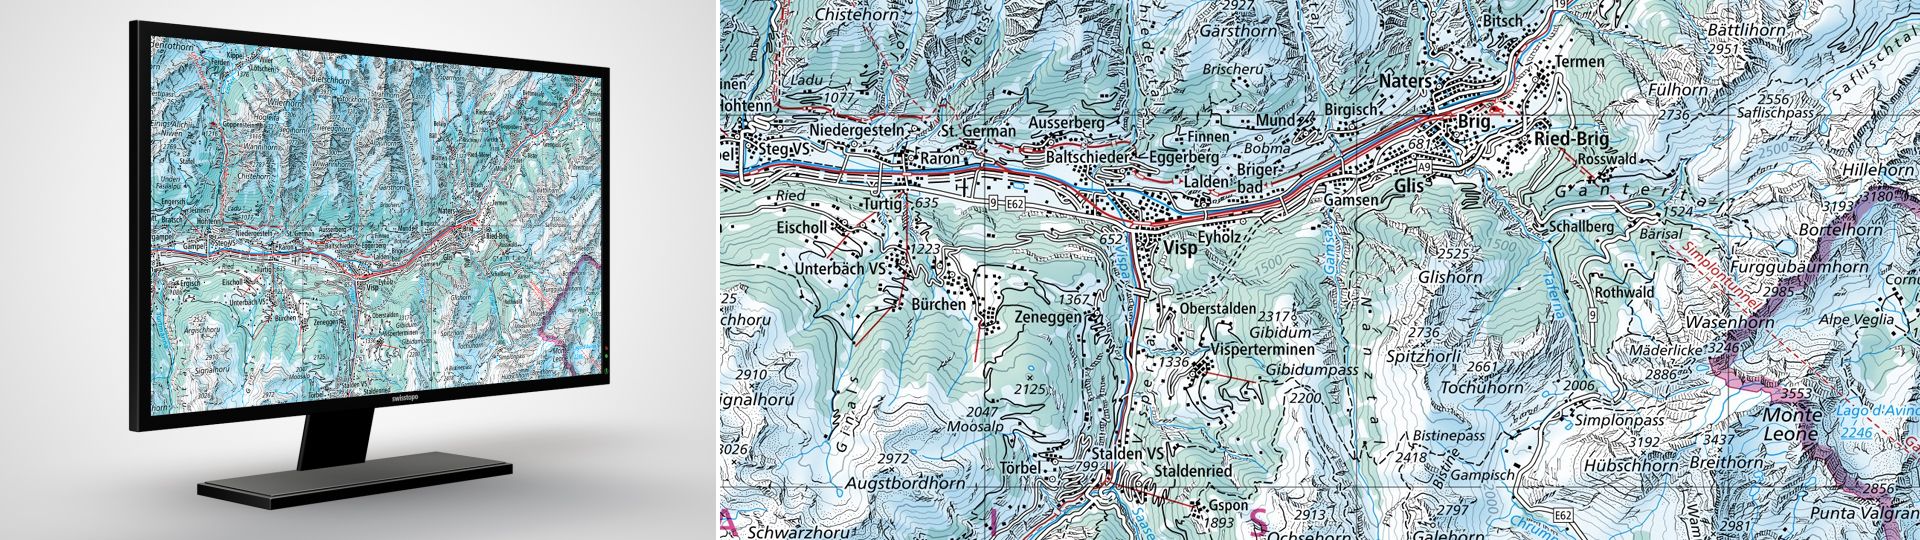 Swiss Map Raster Winter 200: Swiss Map Raster Winter 200 is the digital version of the national map in 1:200,000 in winter representation and in raster format.